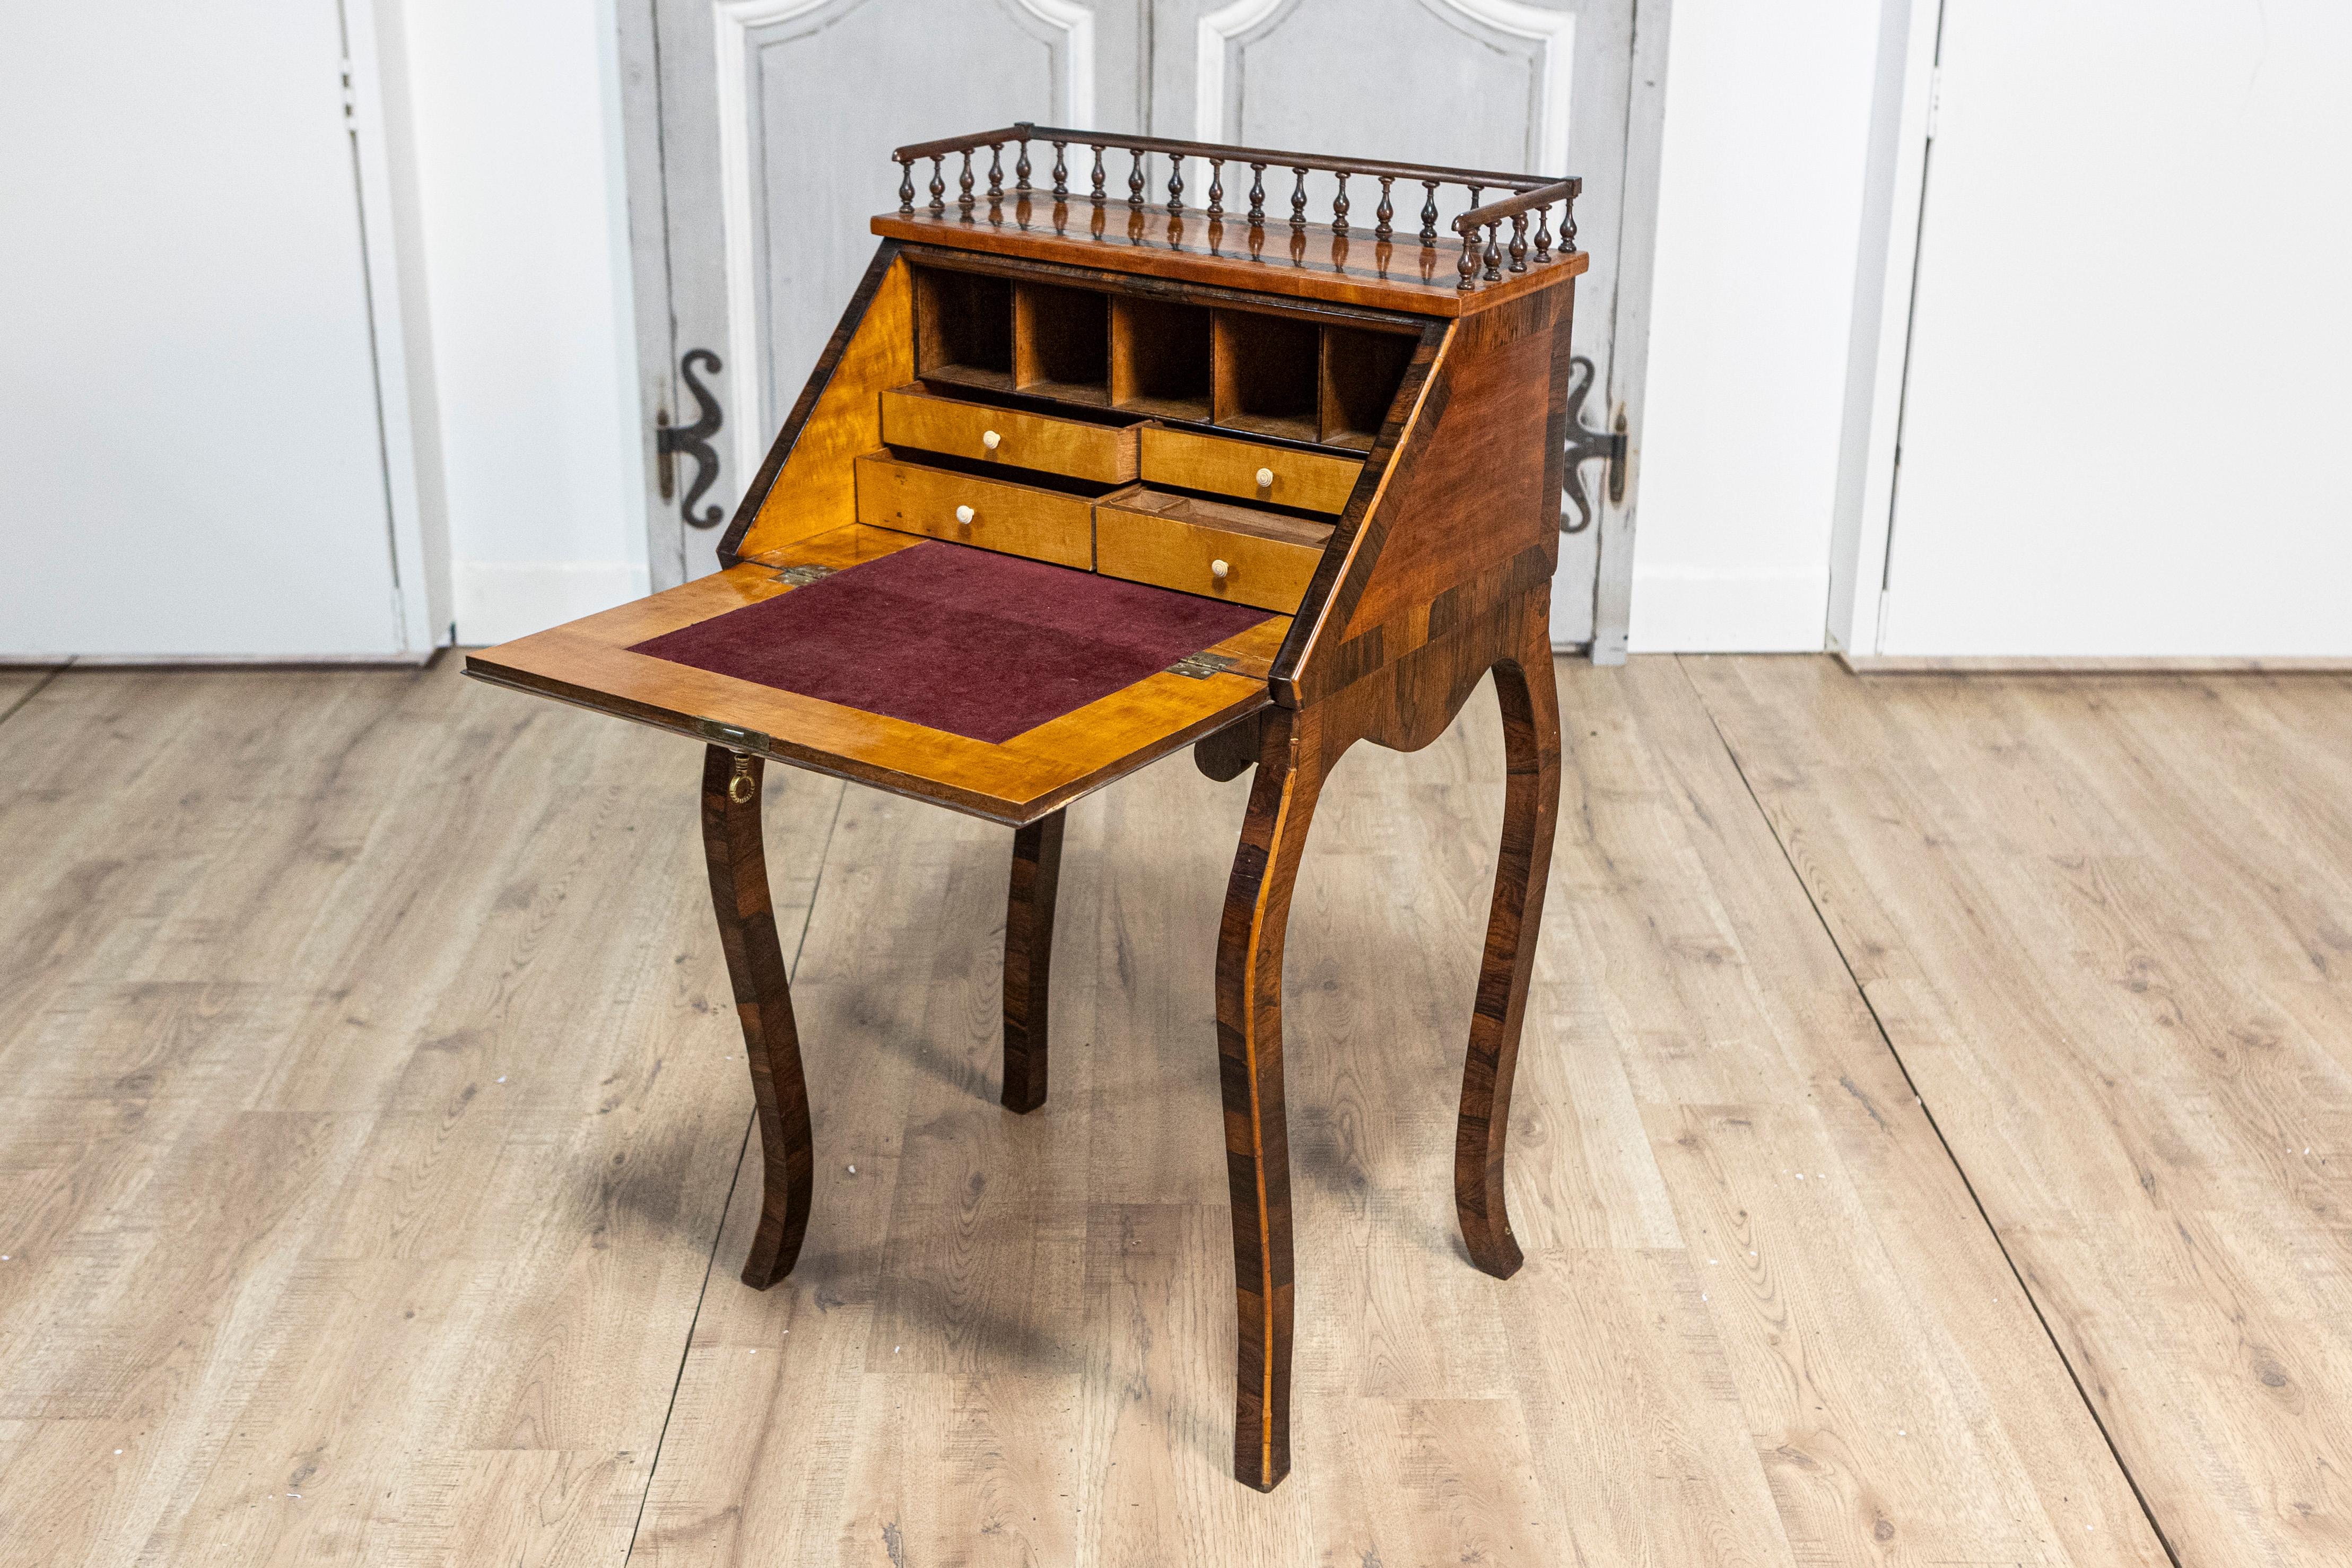 Italian 19th Century Walnut and Mahogany Writing Table with Slant Front Desk For Sale 3